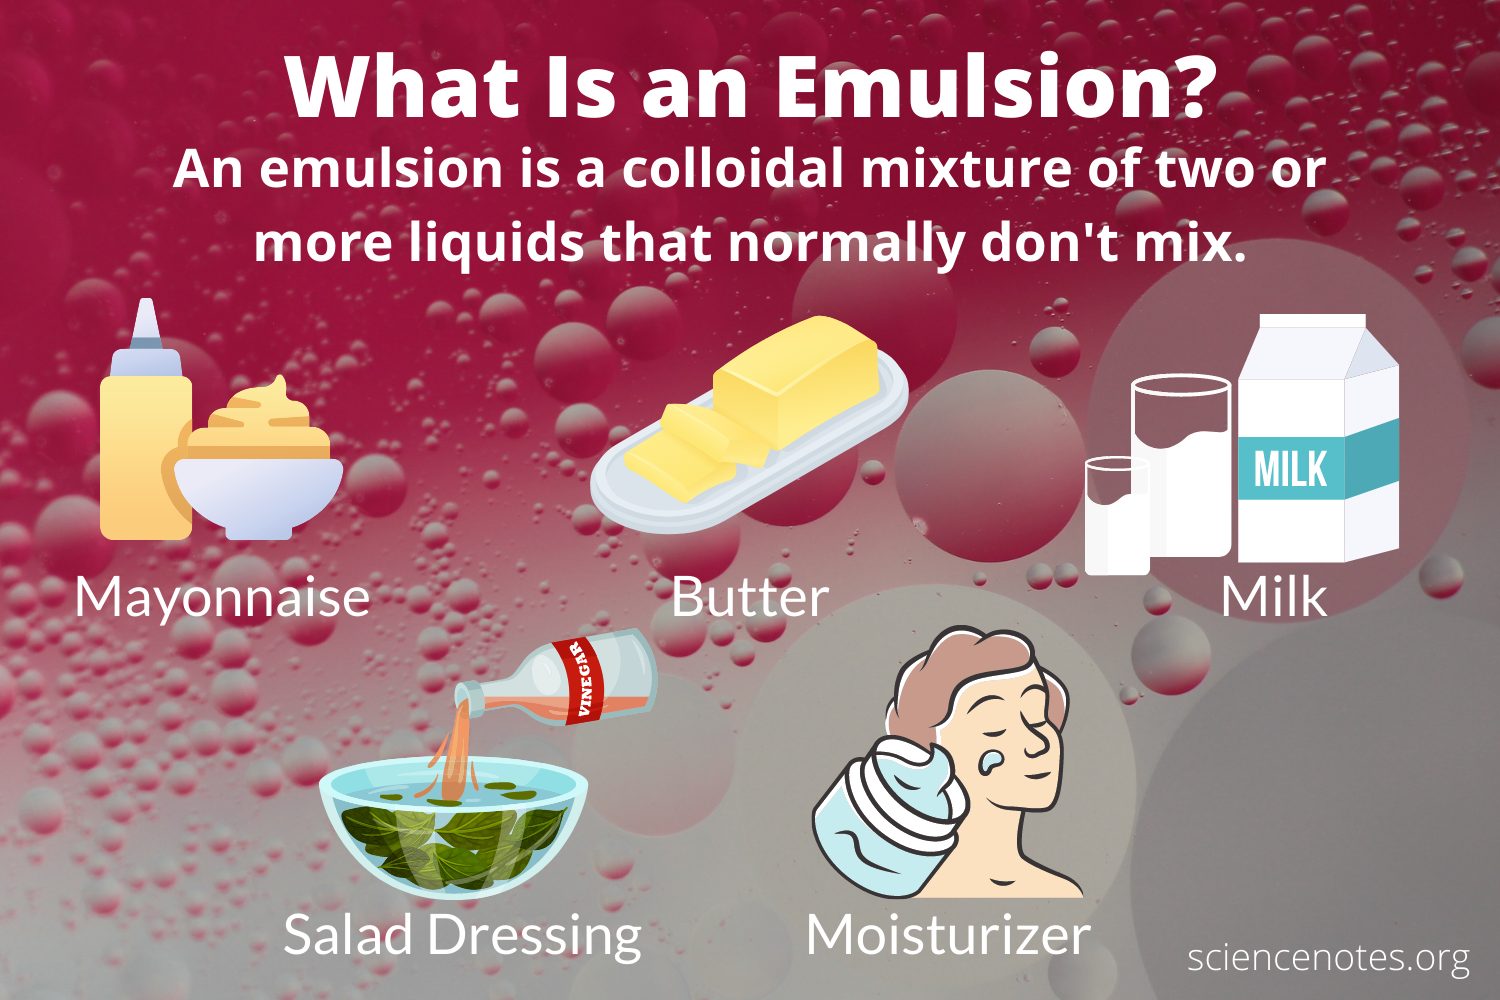 What Is an Emulsion? Definition and Examples